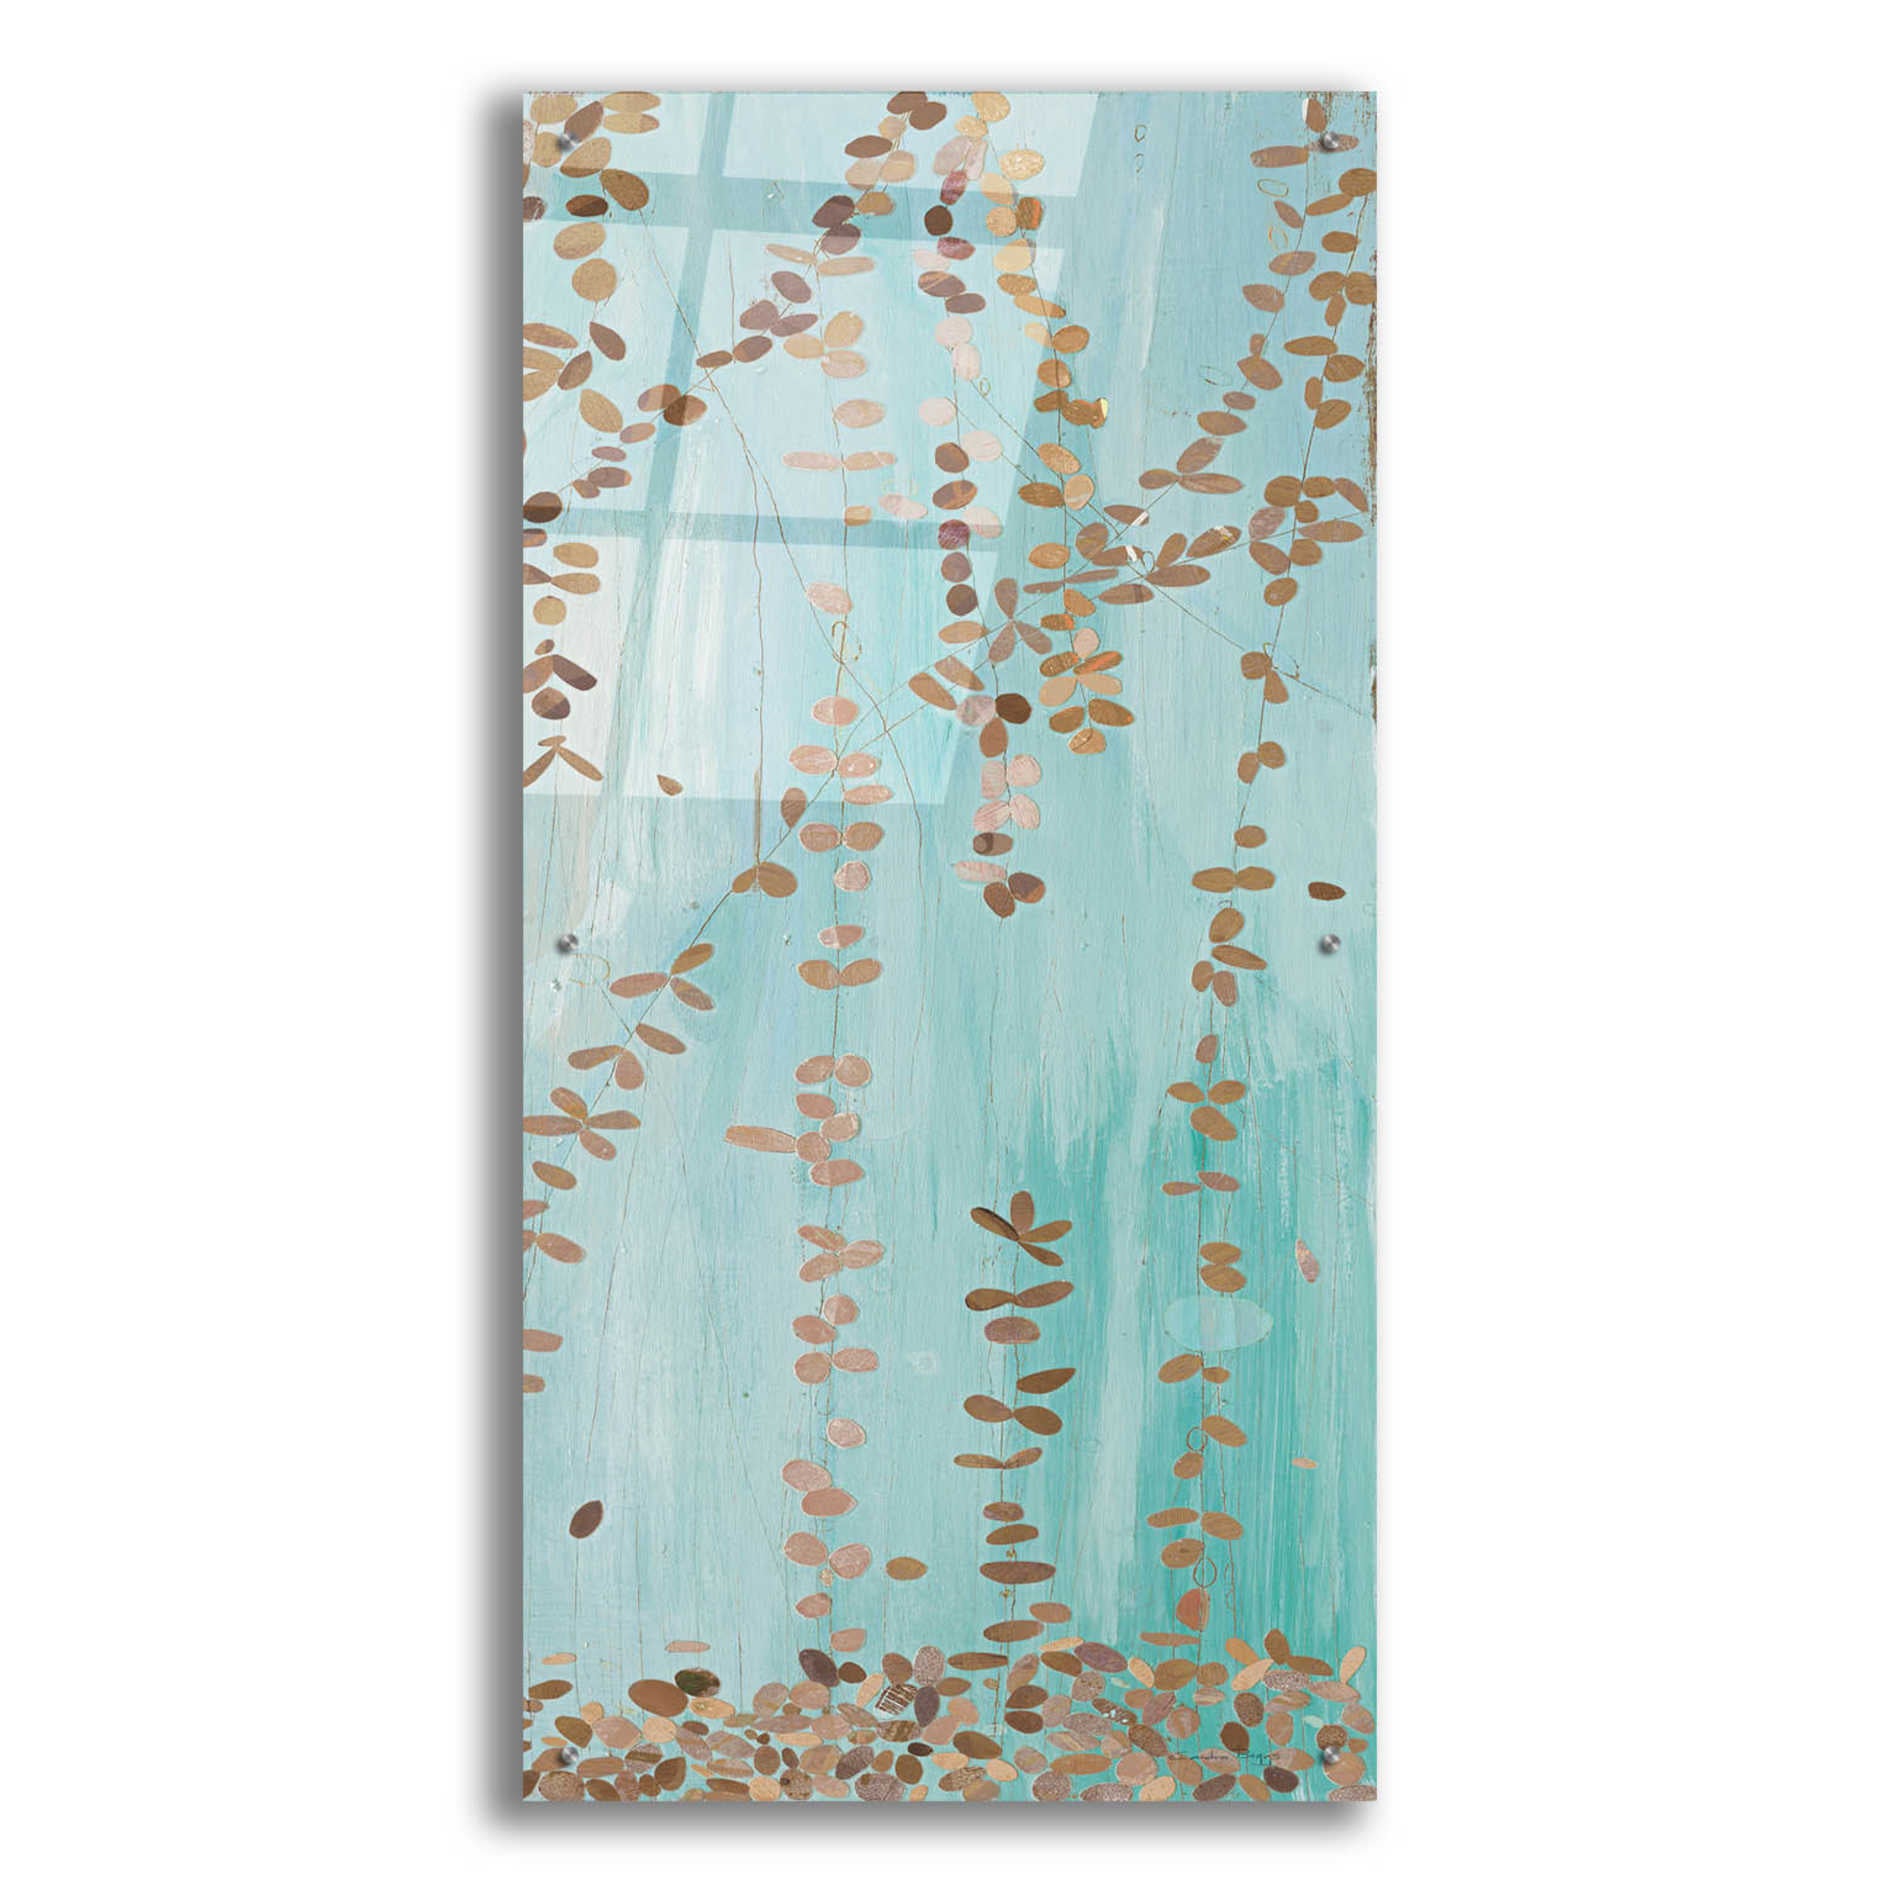 Epic Art 'Trailing Vines II Blue' by Candra Boggs,  Acrylic Glass Wall Art,24x48